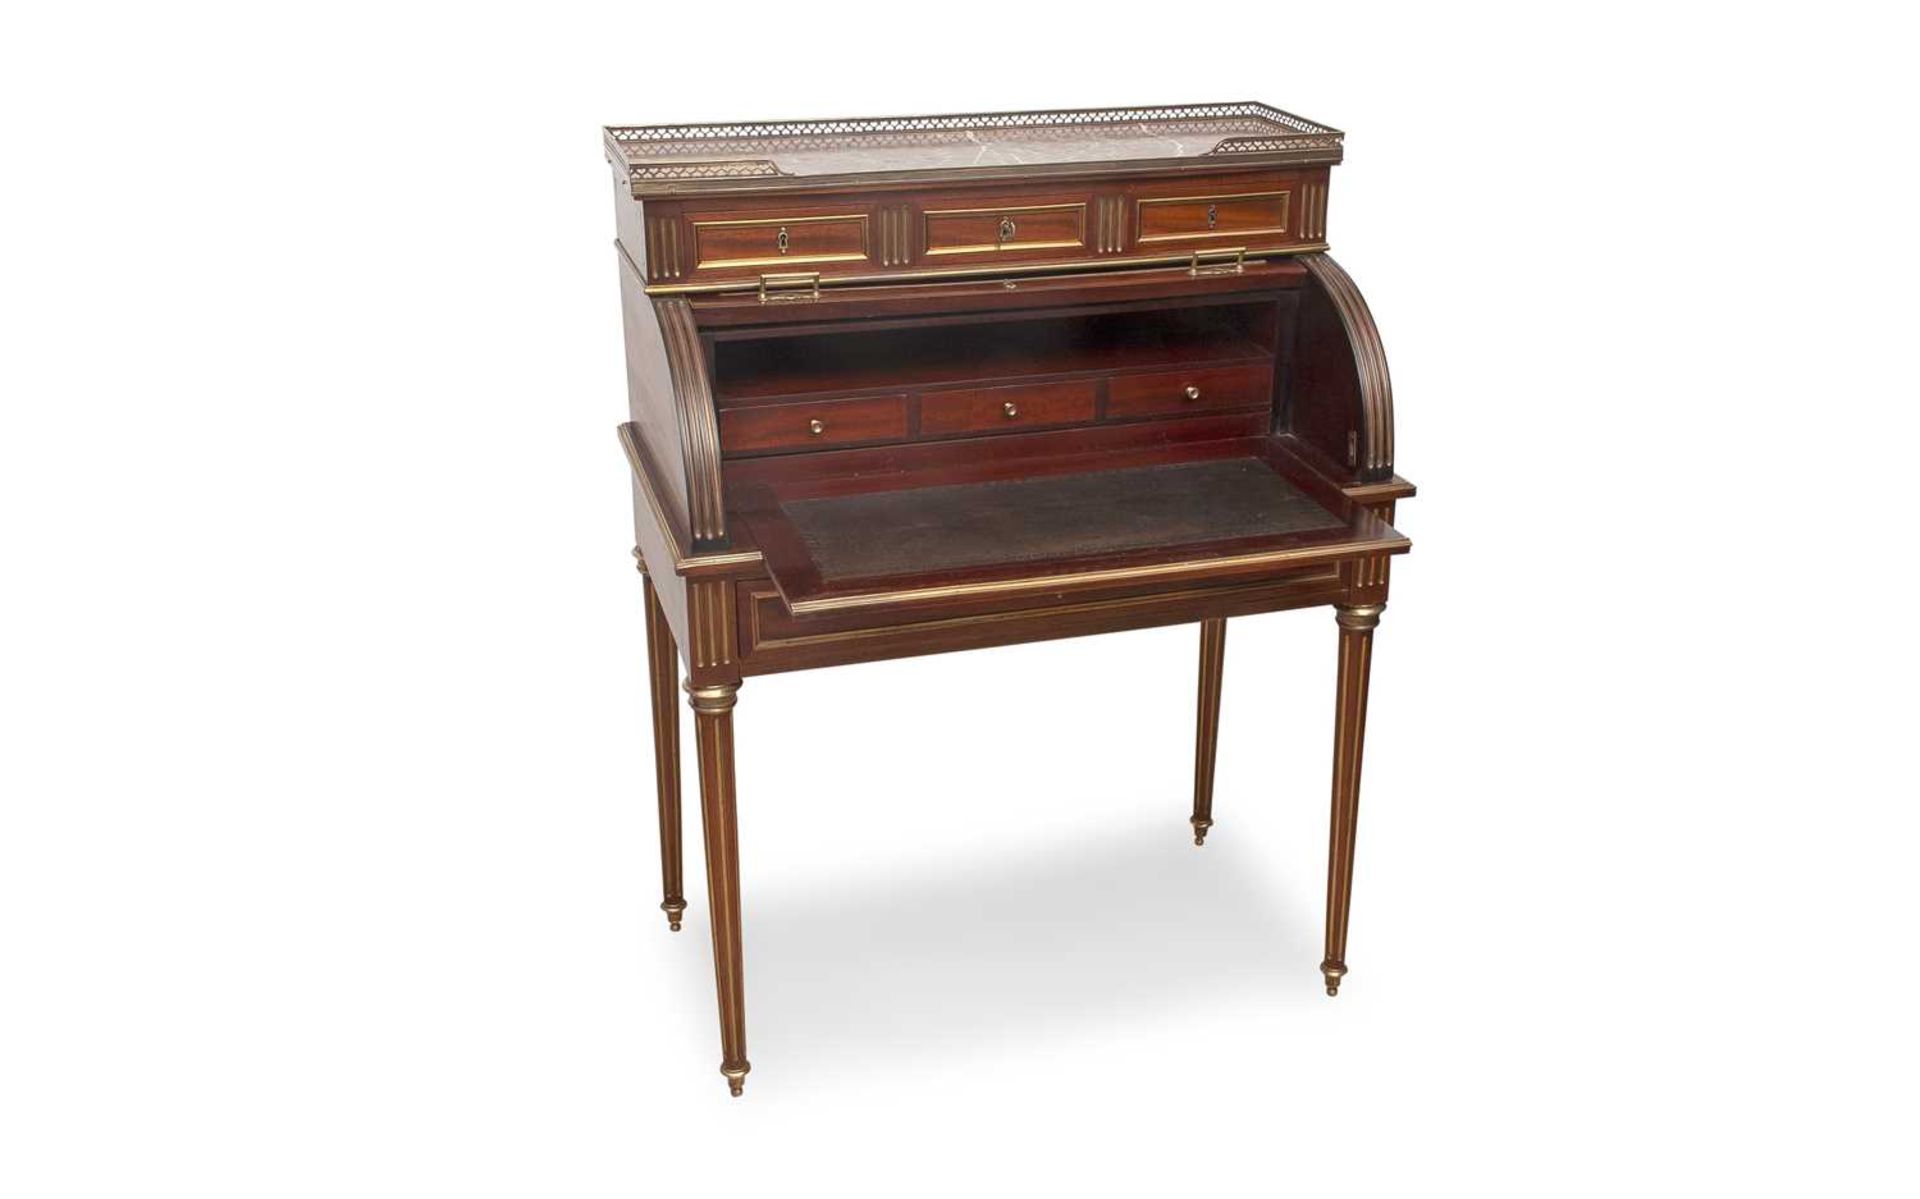 AN EARLY 20TH CENTURY FRENCH MAHOGANY AND VERNIS MARTIN CYLINDER BUREAU - Image 3 of 3